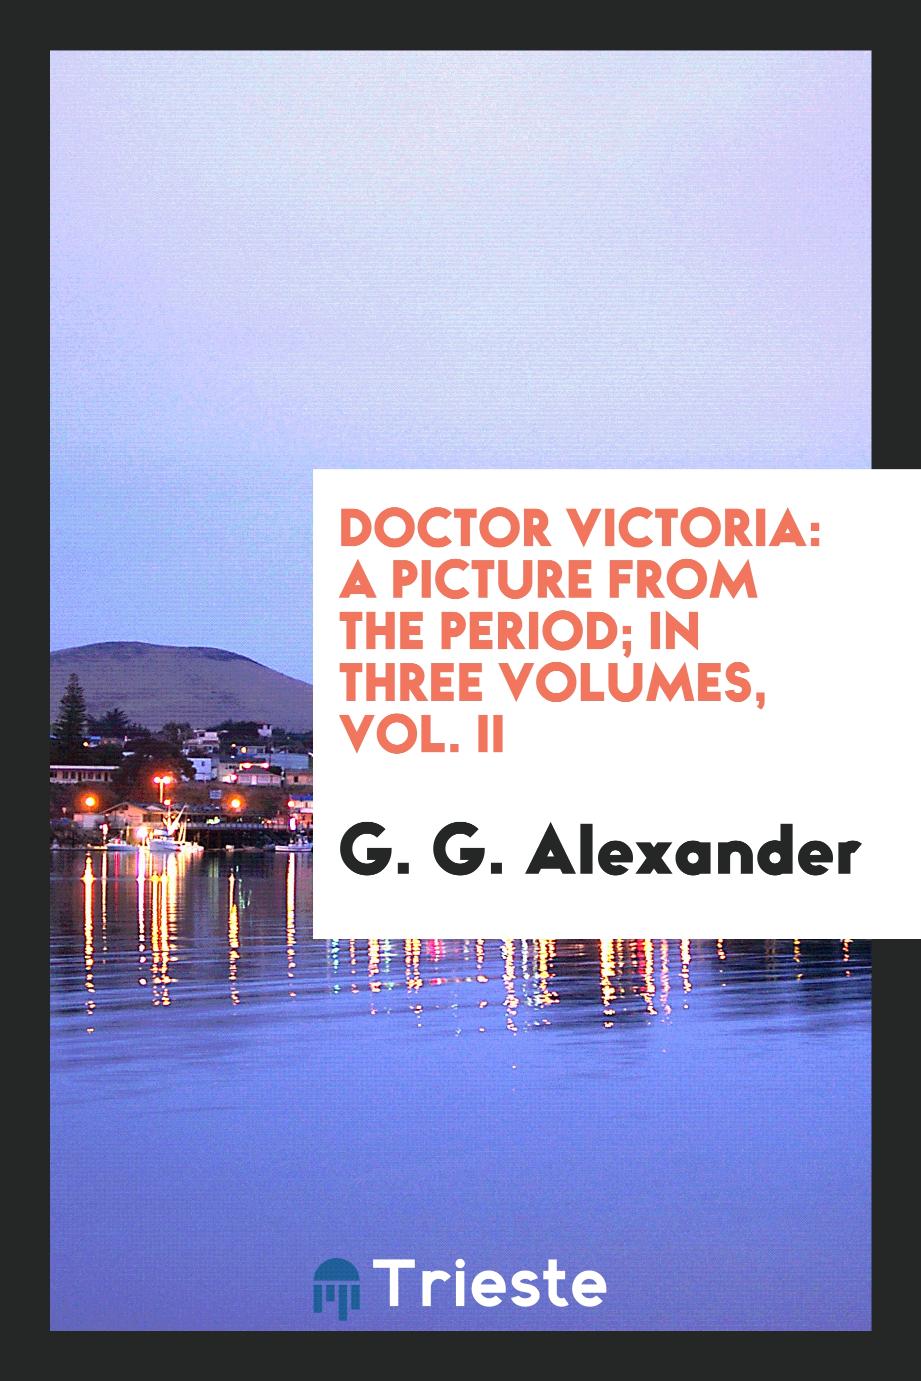 Doctor Victoria: a picture from the period; in three volumes, Vol. II